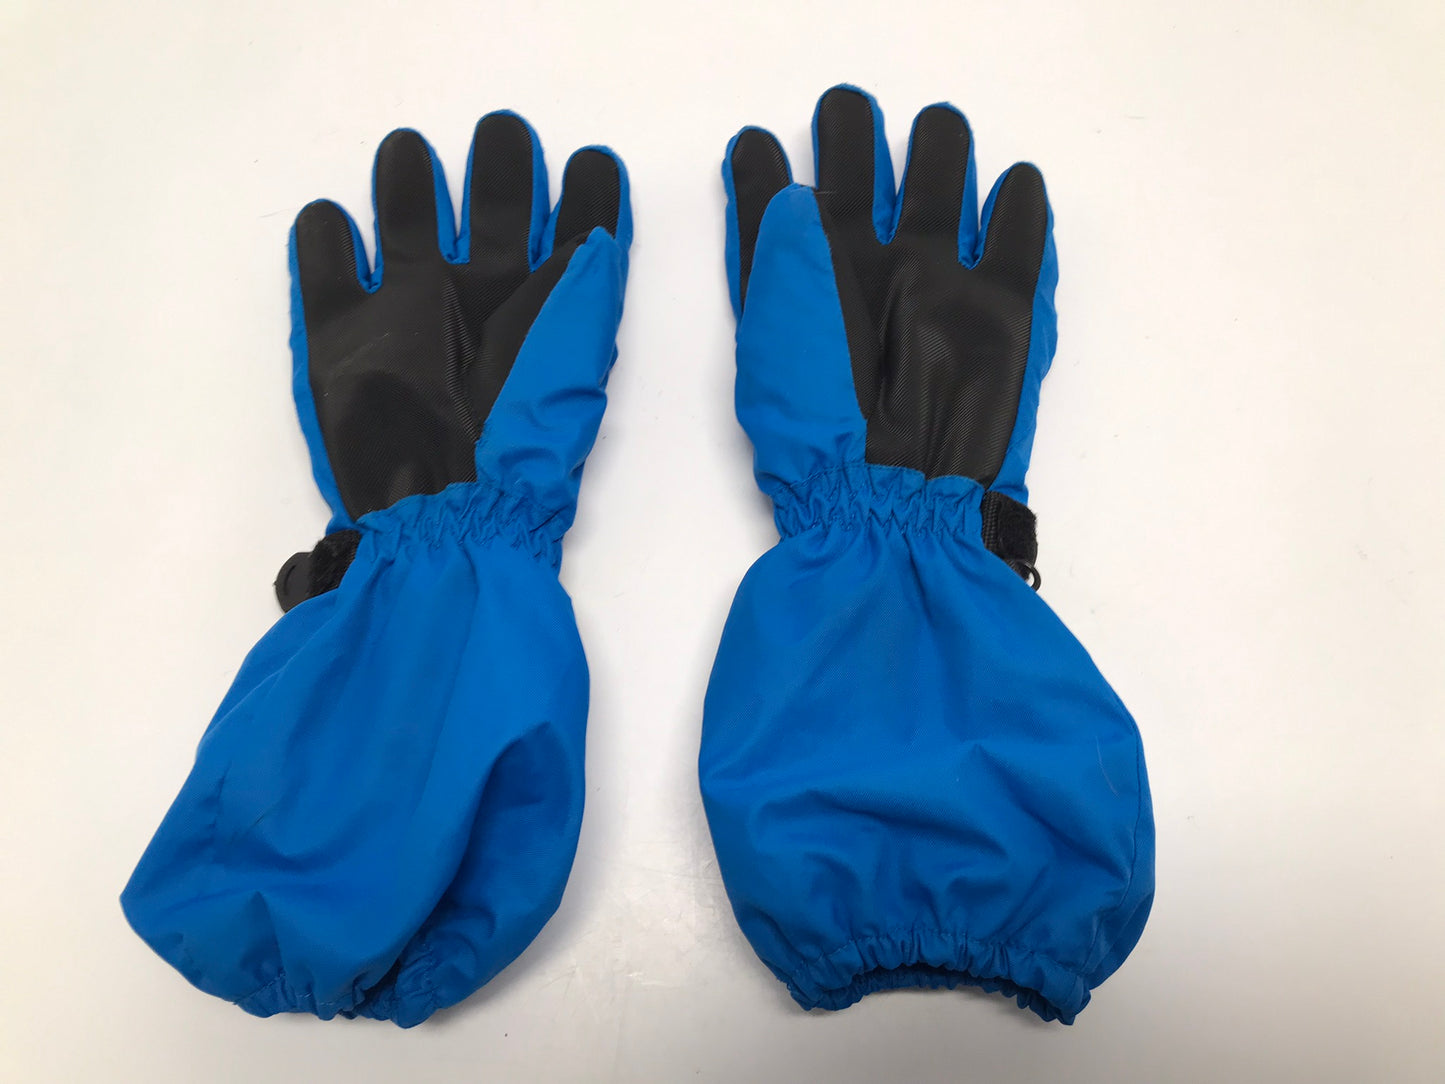 Winter Gloves and Mitts Child Size 7-9 Aqua Blue Black